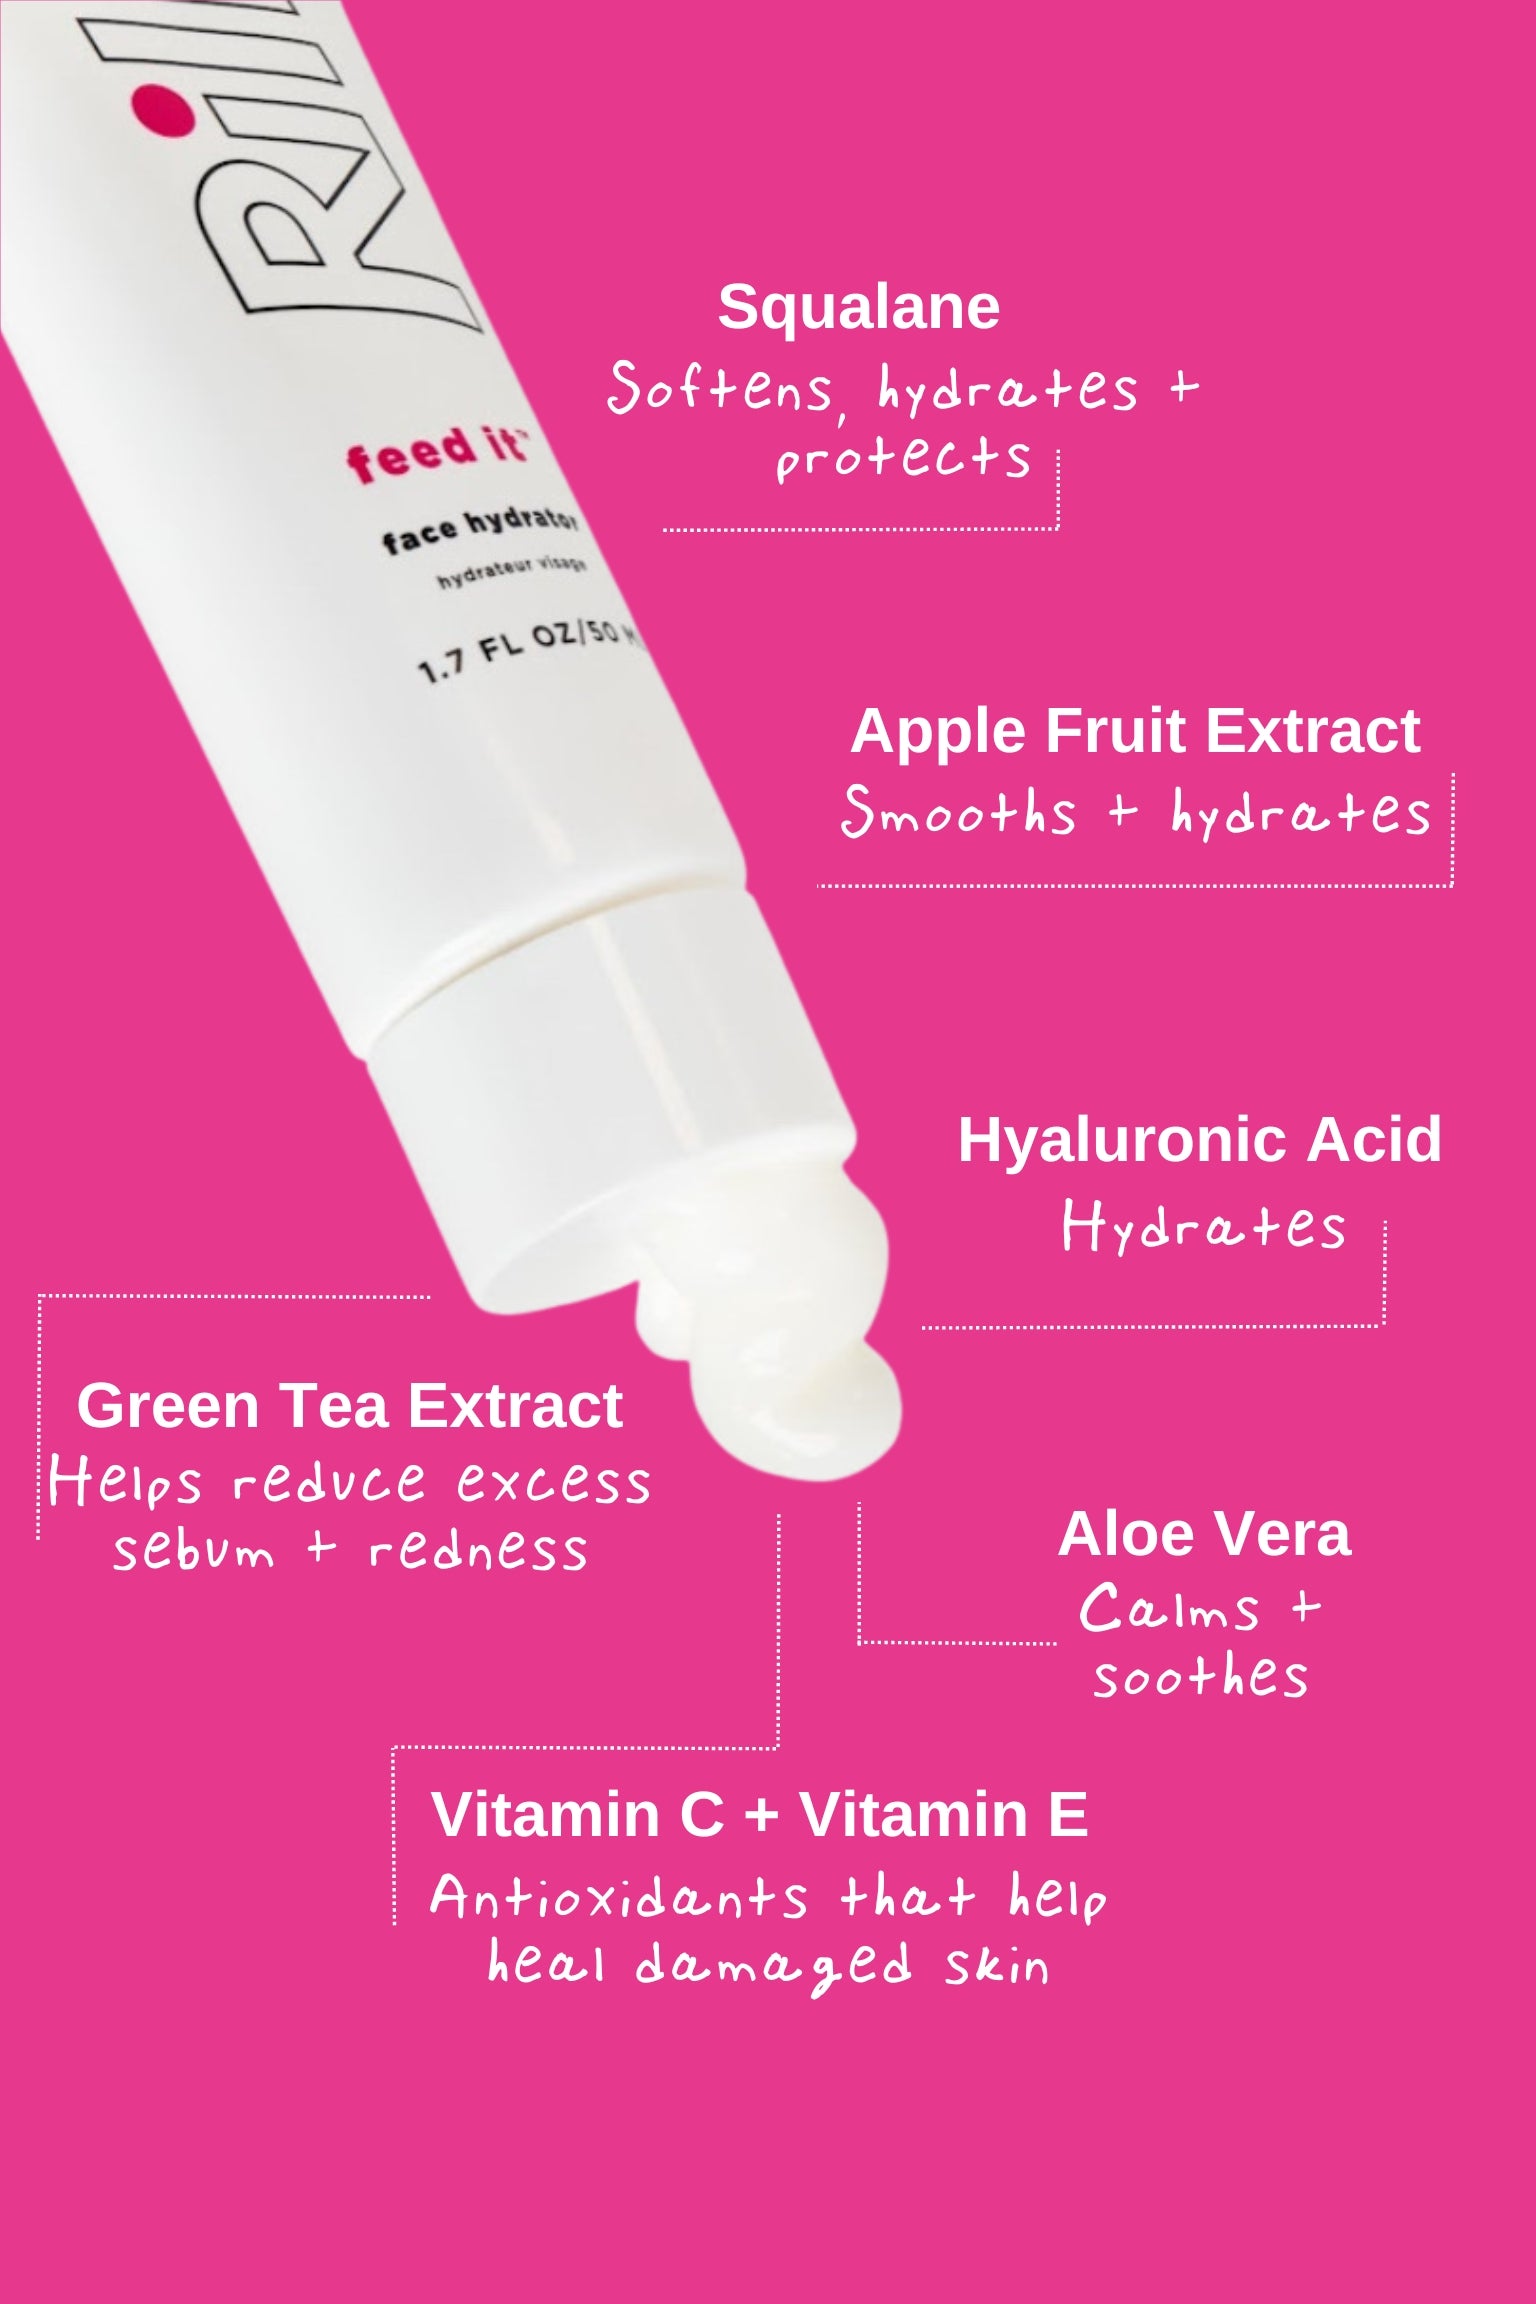 The white Rile tube showing some of the hydrator moisturizer. The ingredients Squalane, Apple Fruit extract, Aloe vera, hyaluronic acid, vitamin C and Vitamin E and green tea extract are highlighted and how they soften, hydrate, calm and soothe skin.